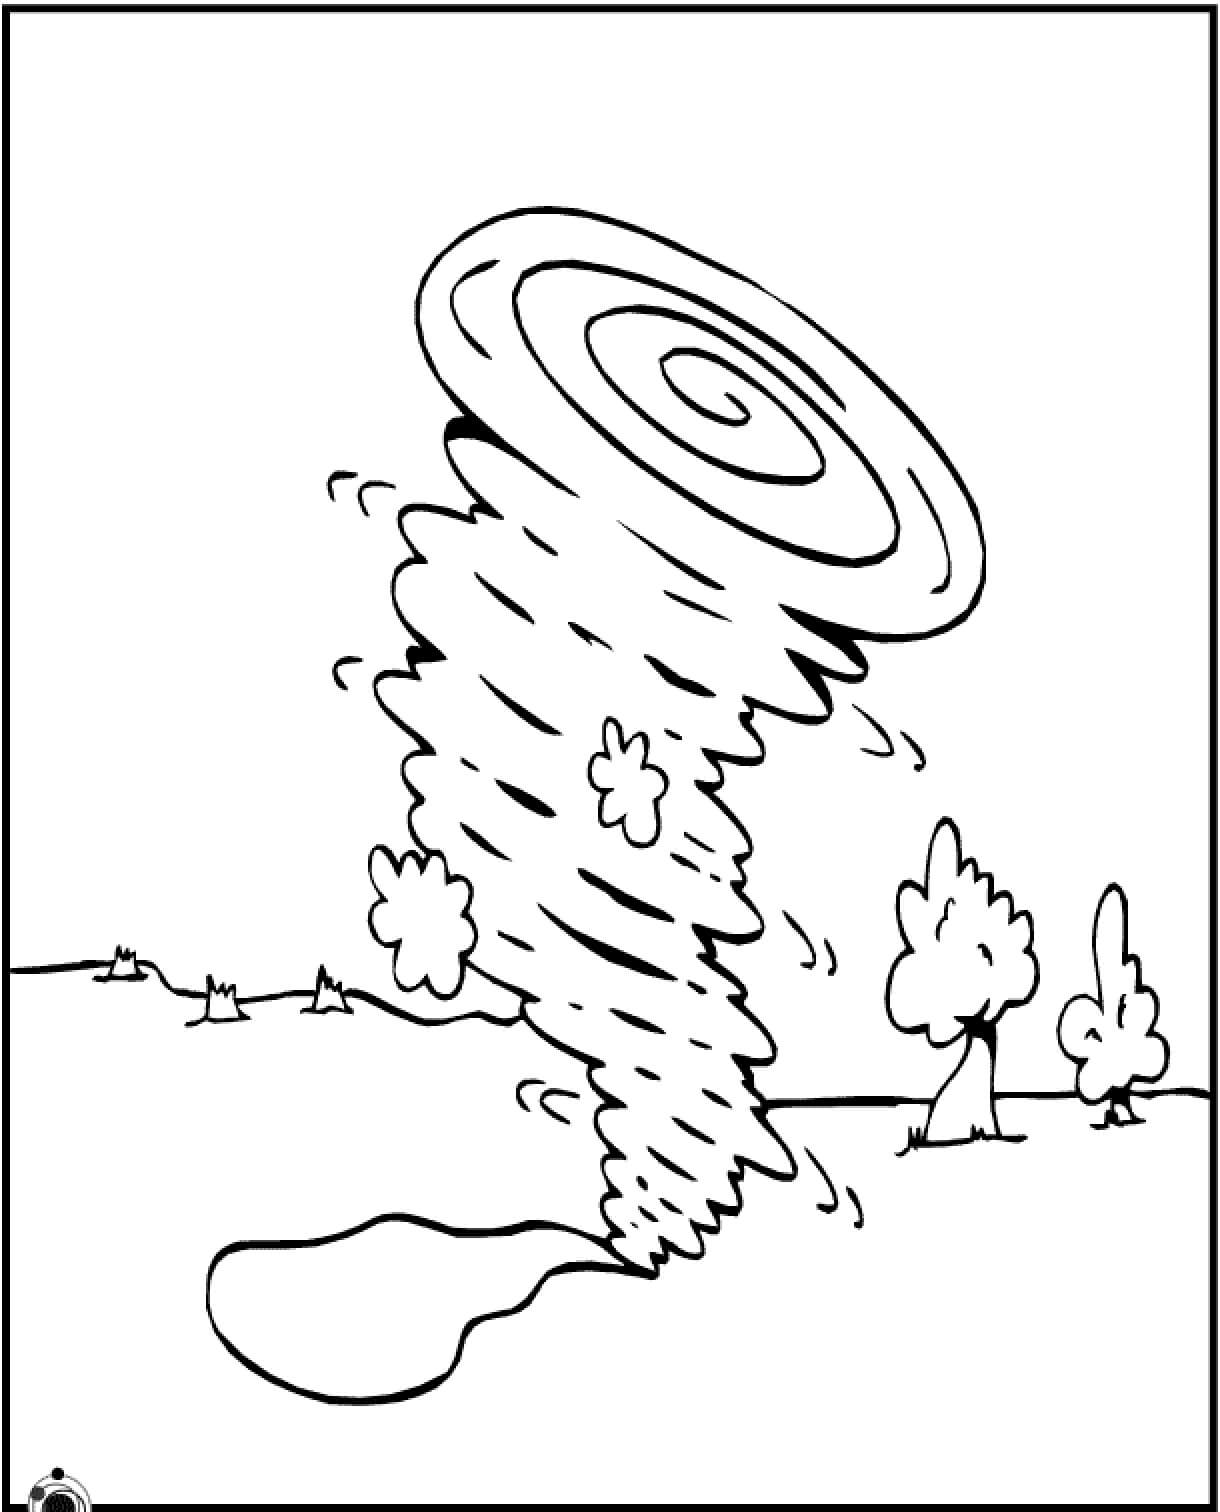 Grosse Tornade coloring page